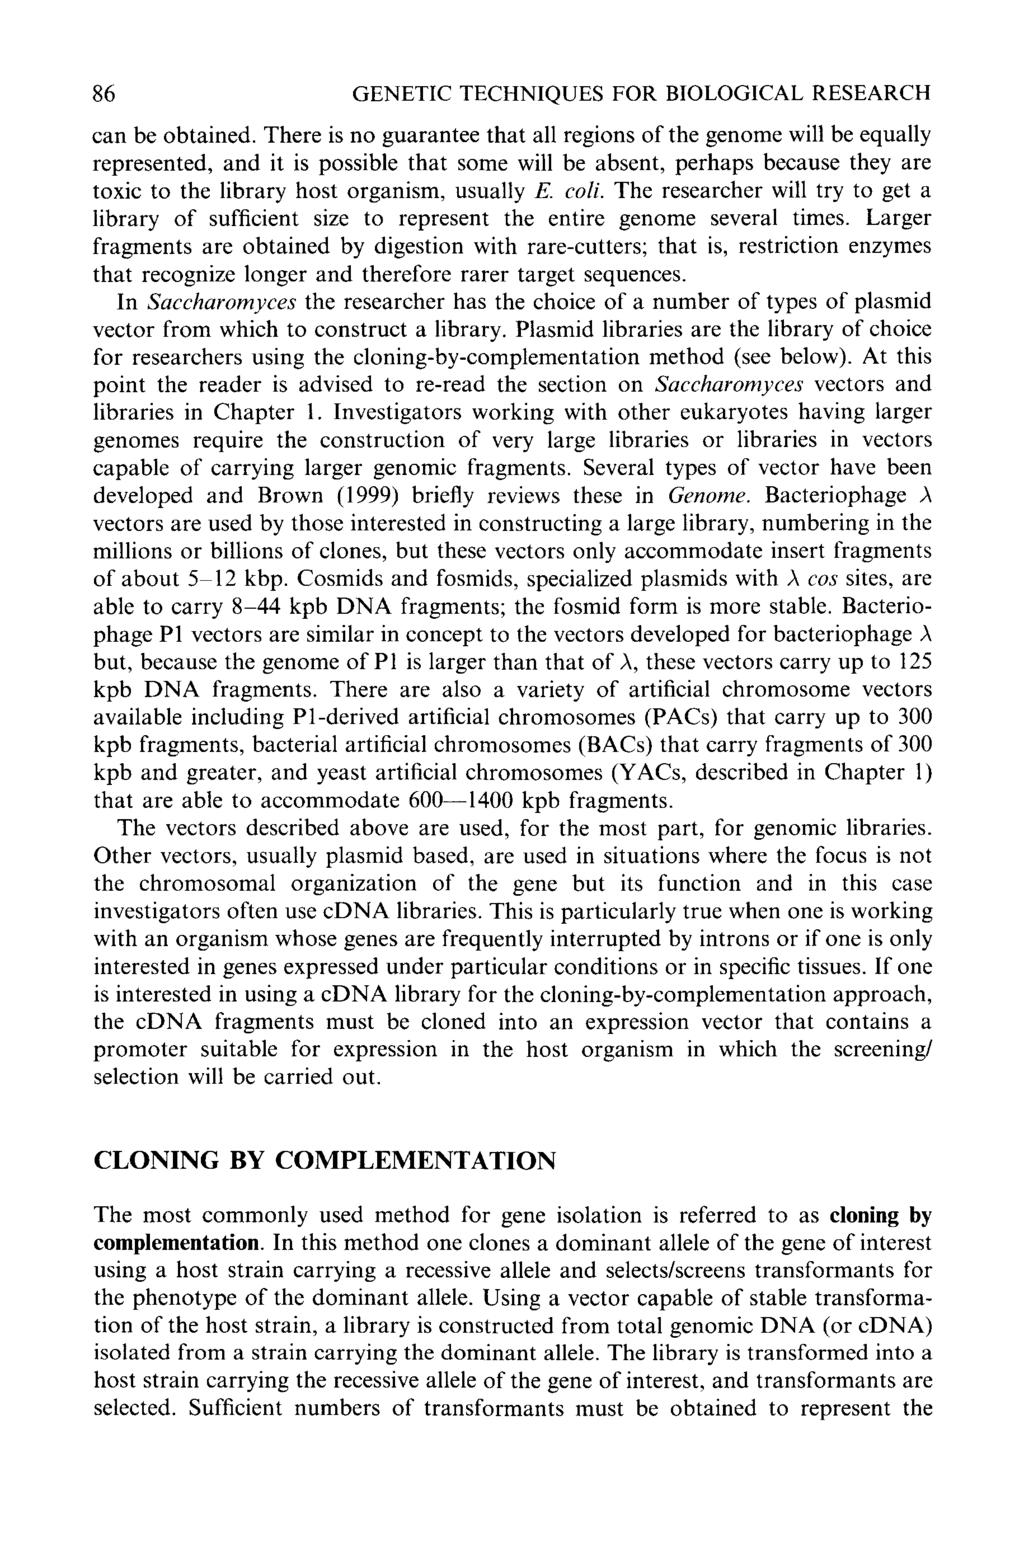 86 GENETIC TECHNIQUES FOR BIOLOGICAL RESEARCH can be obtained.